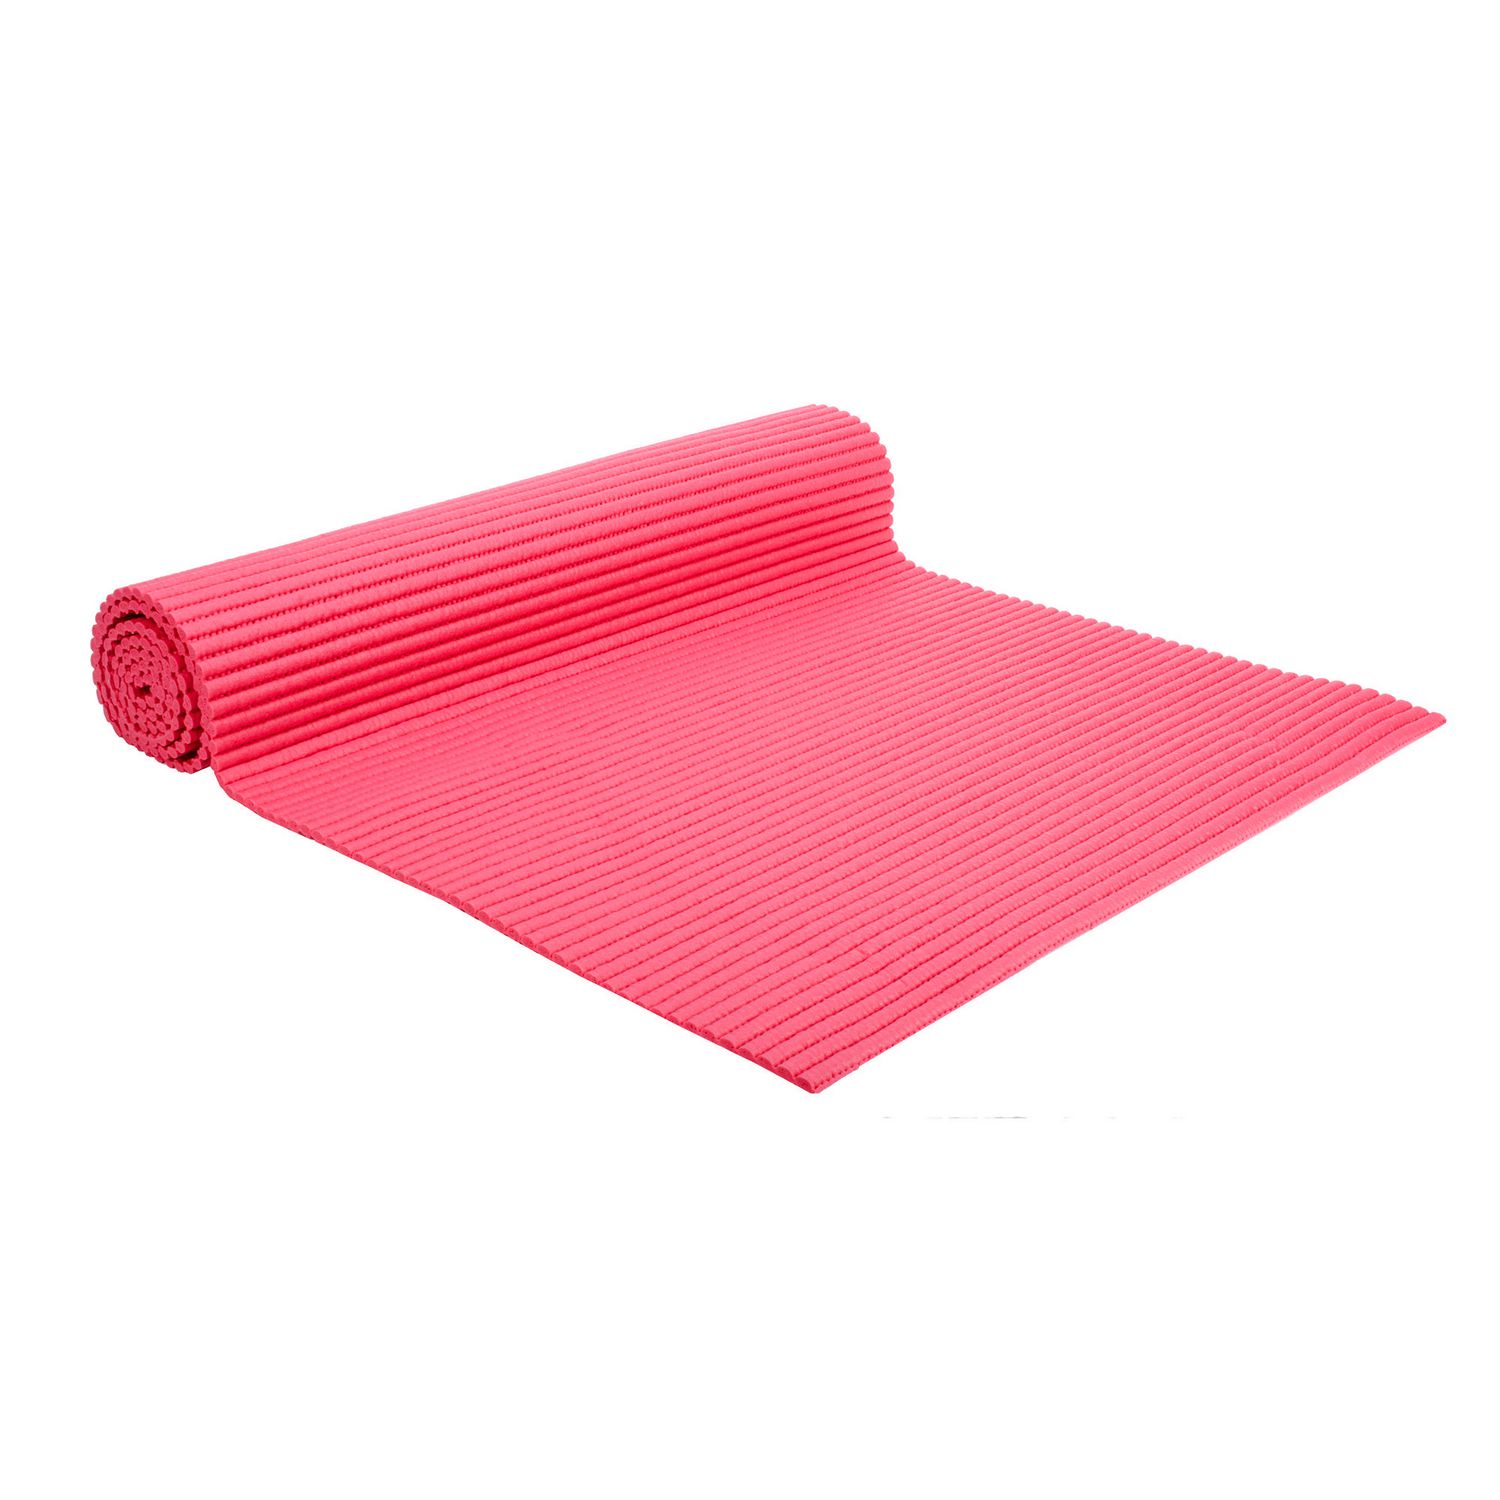 30 Minute Everlast workout mat for push your ABS